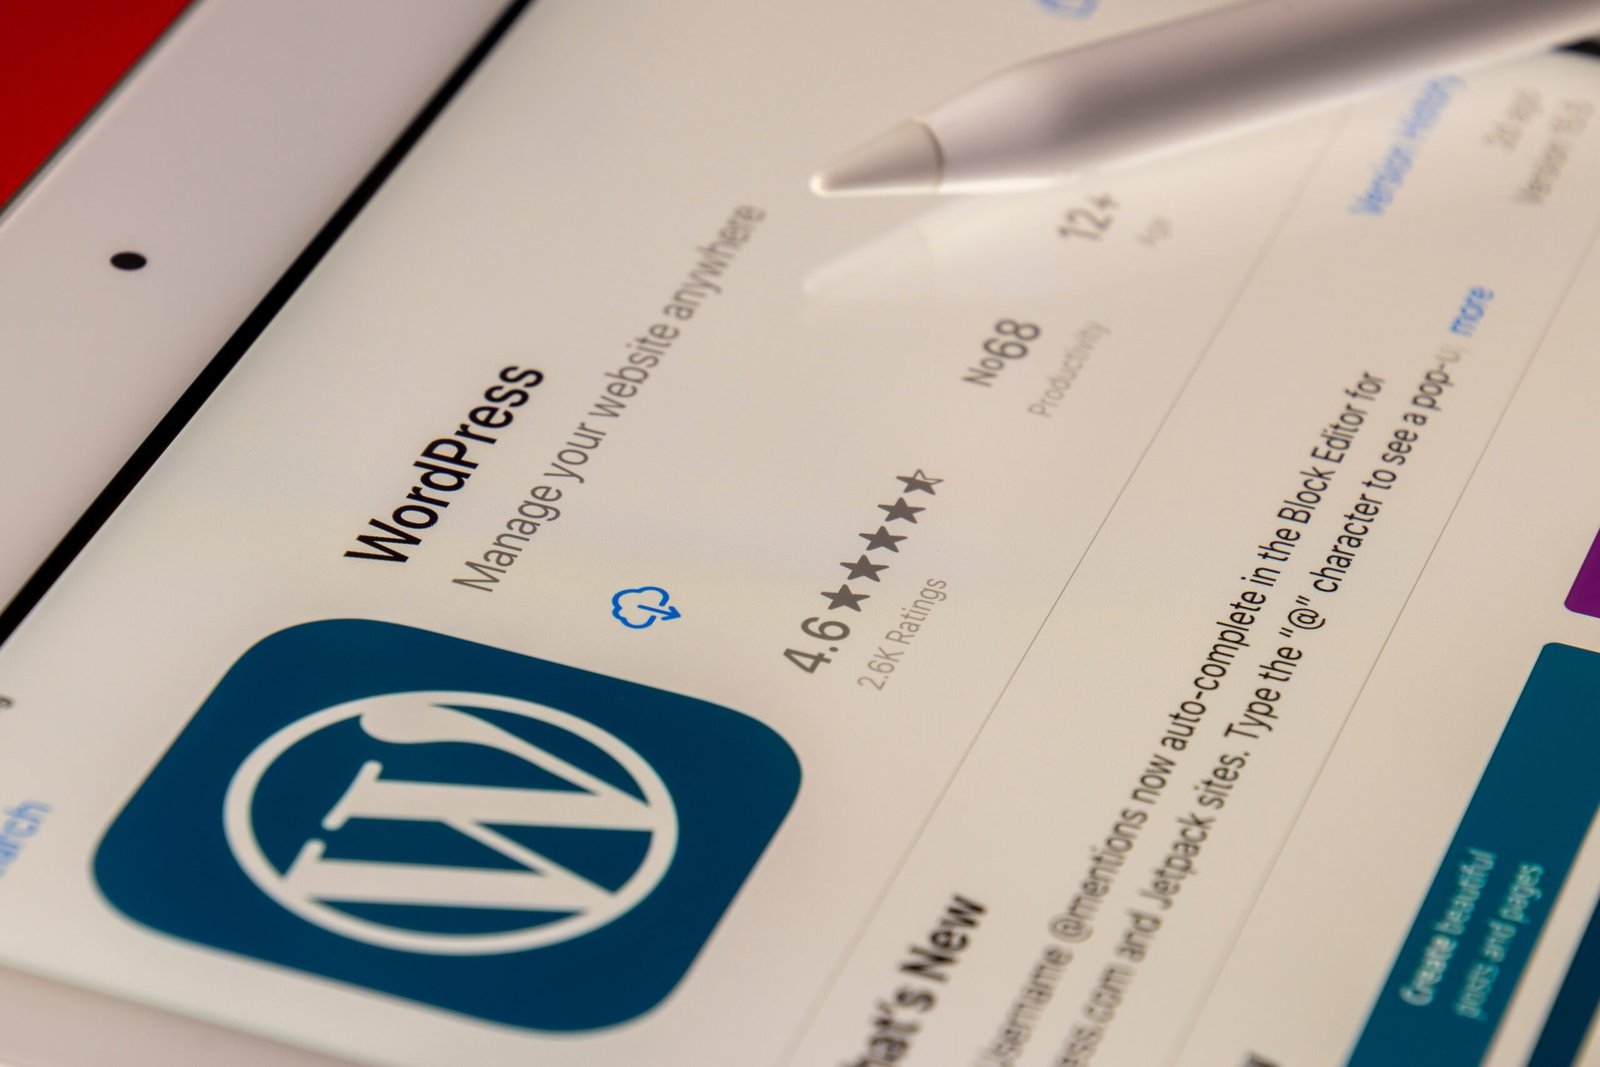 A Complete WordPress Guide for Beginners